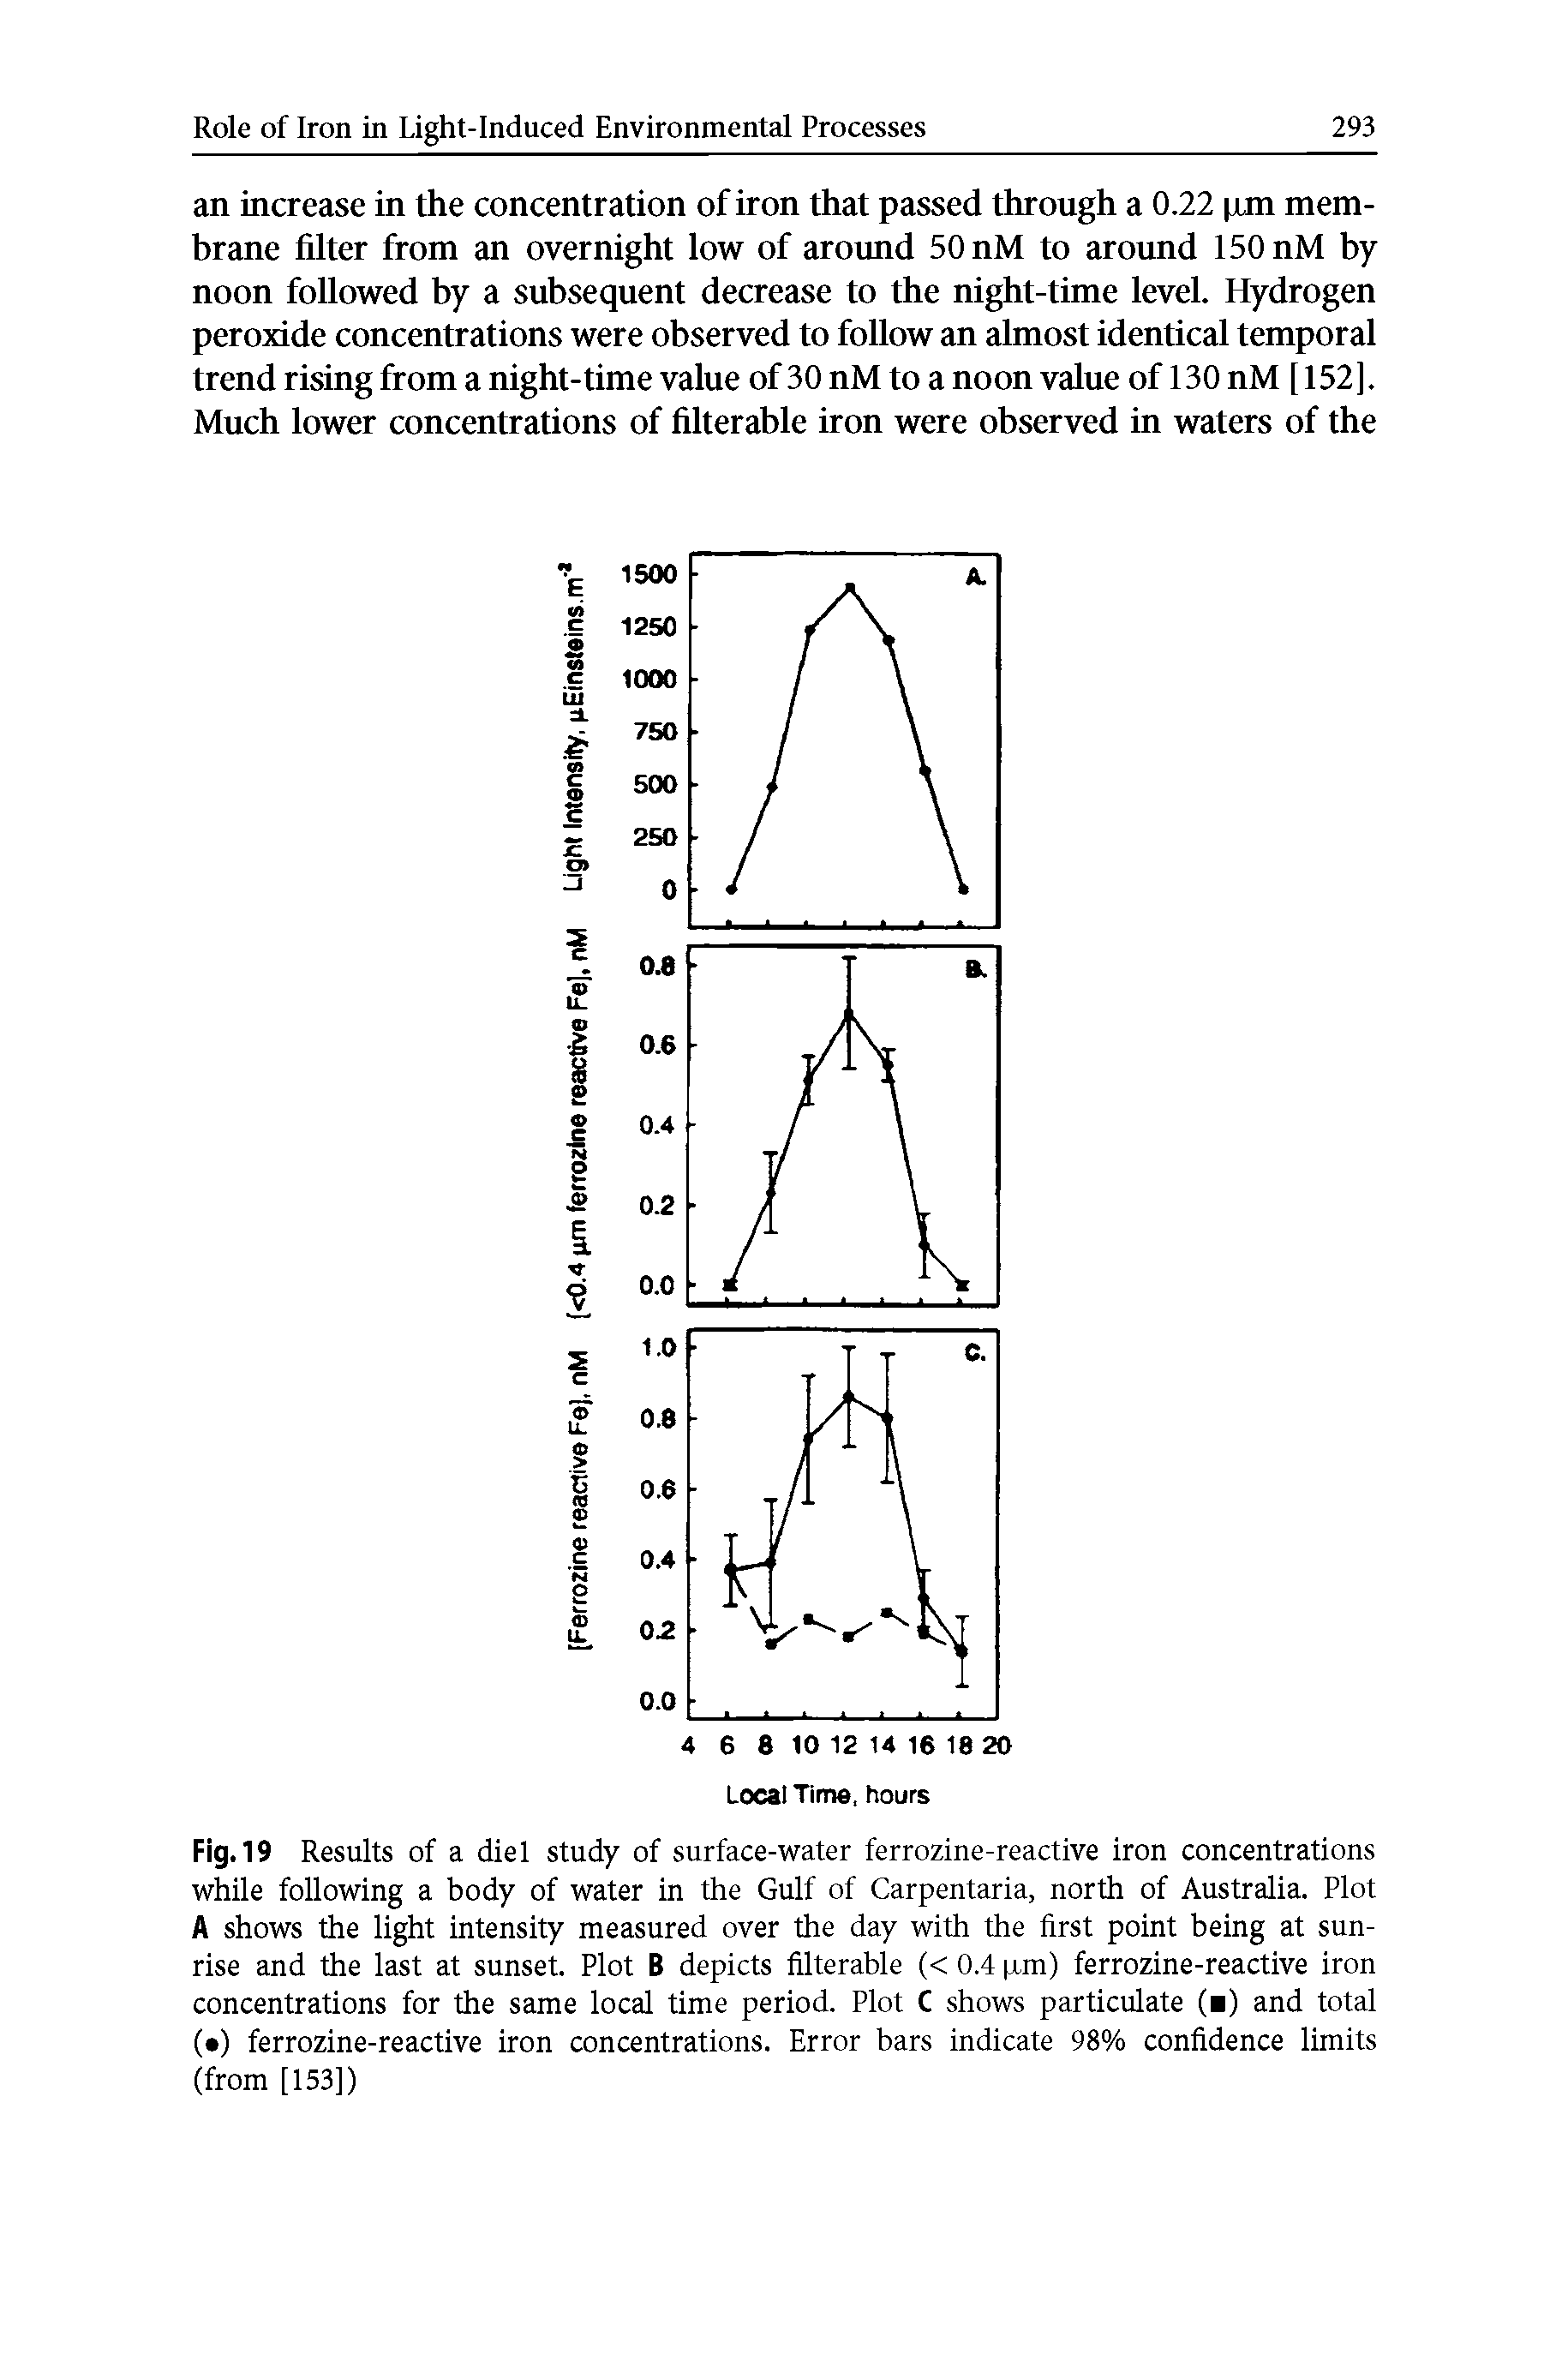 Fig. 19 Results of a diet study of surface-water ferrozine-reactive iron concentrations while following a body of water in the Gulf of Carpentaria, north of Australia. Plot A shows the light intensity measured over the day with the first point being at sunrise and the last at sunset. Plot B depicts filterable (< 0.4 pm) ferrozine-reactive iron concentrations for the same local time period. Plot C shows particulate ( ) and total ( ) ferrozine-reactive iron concentrations. Error bars indicate 98% confidence limits (from [153])...